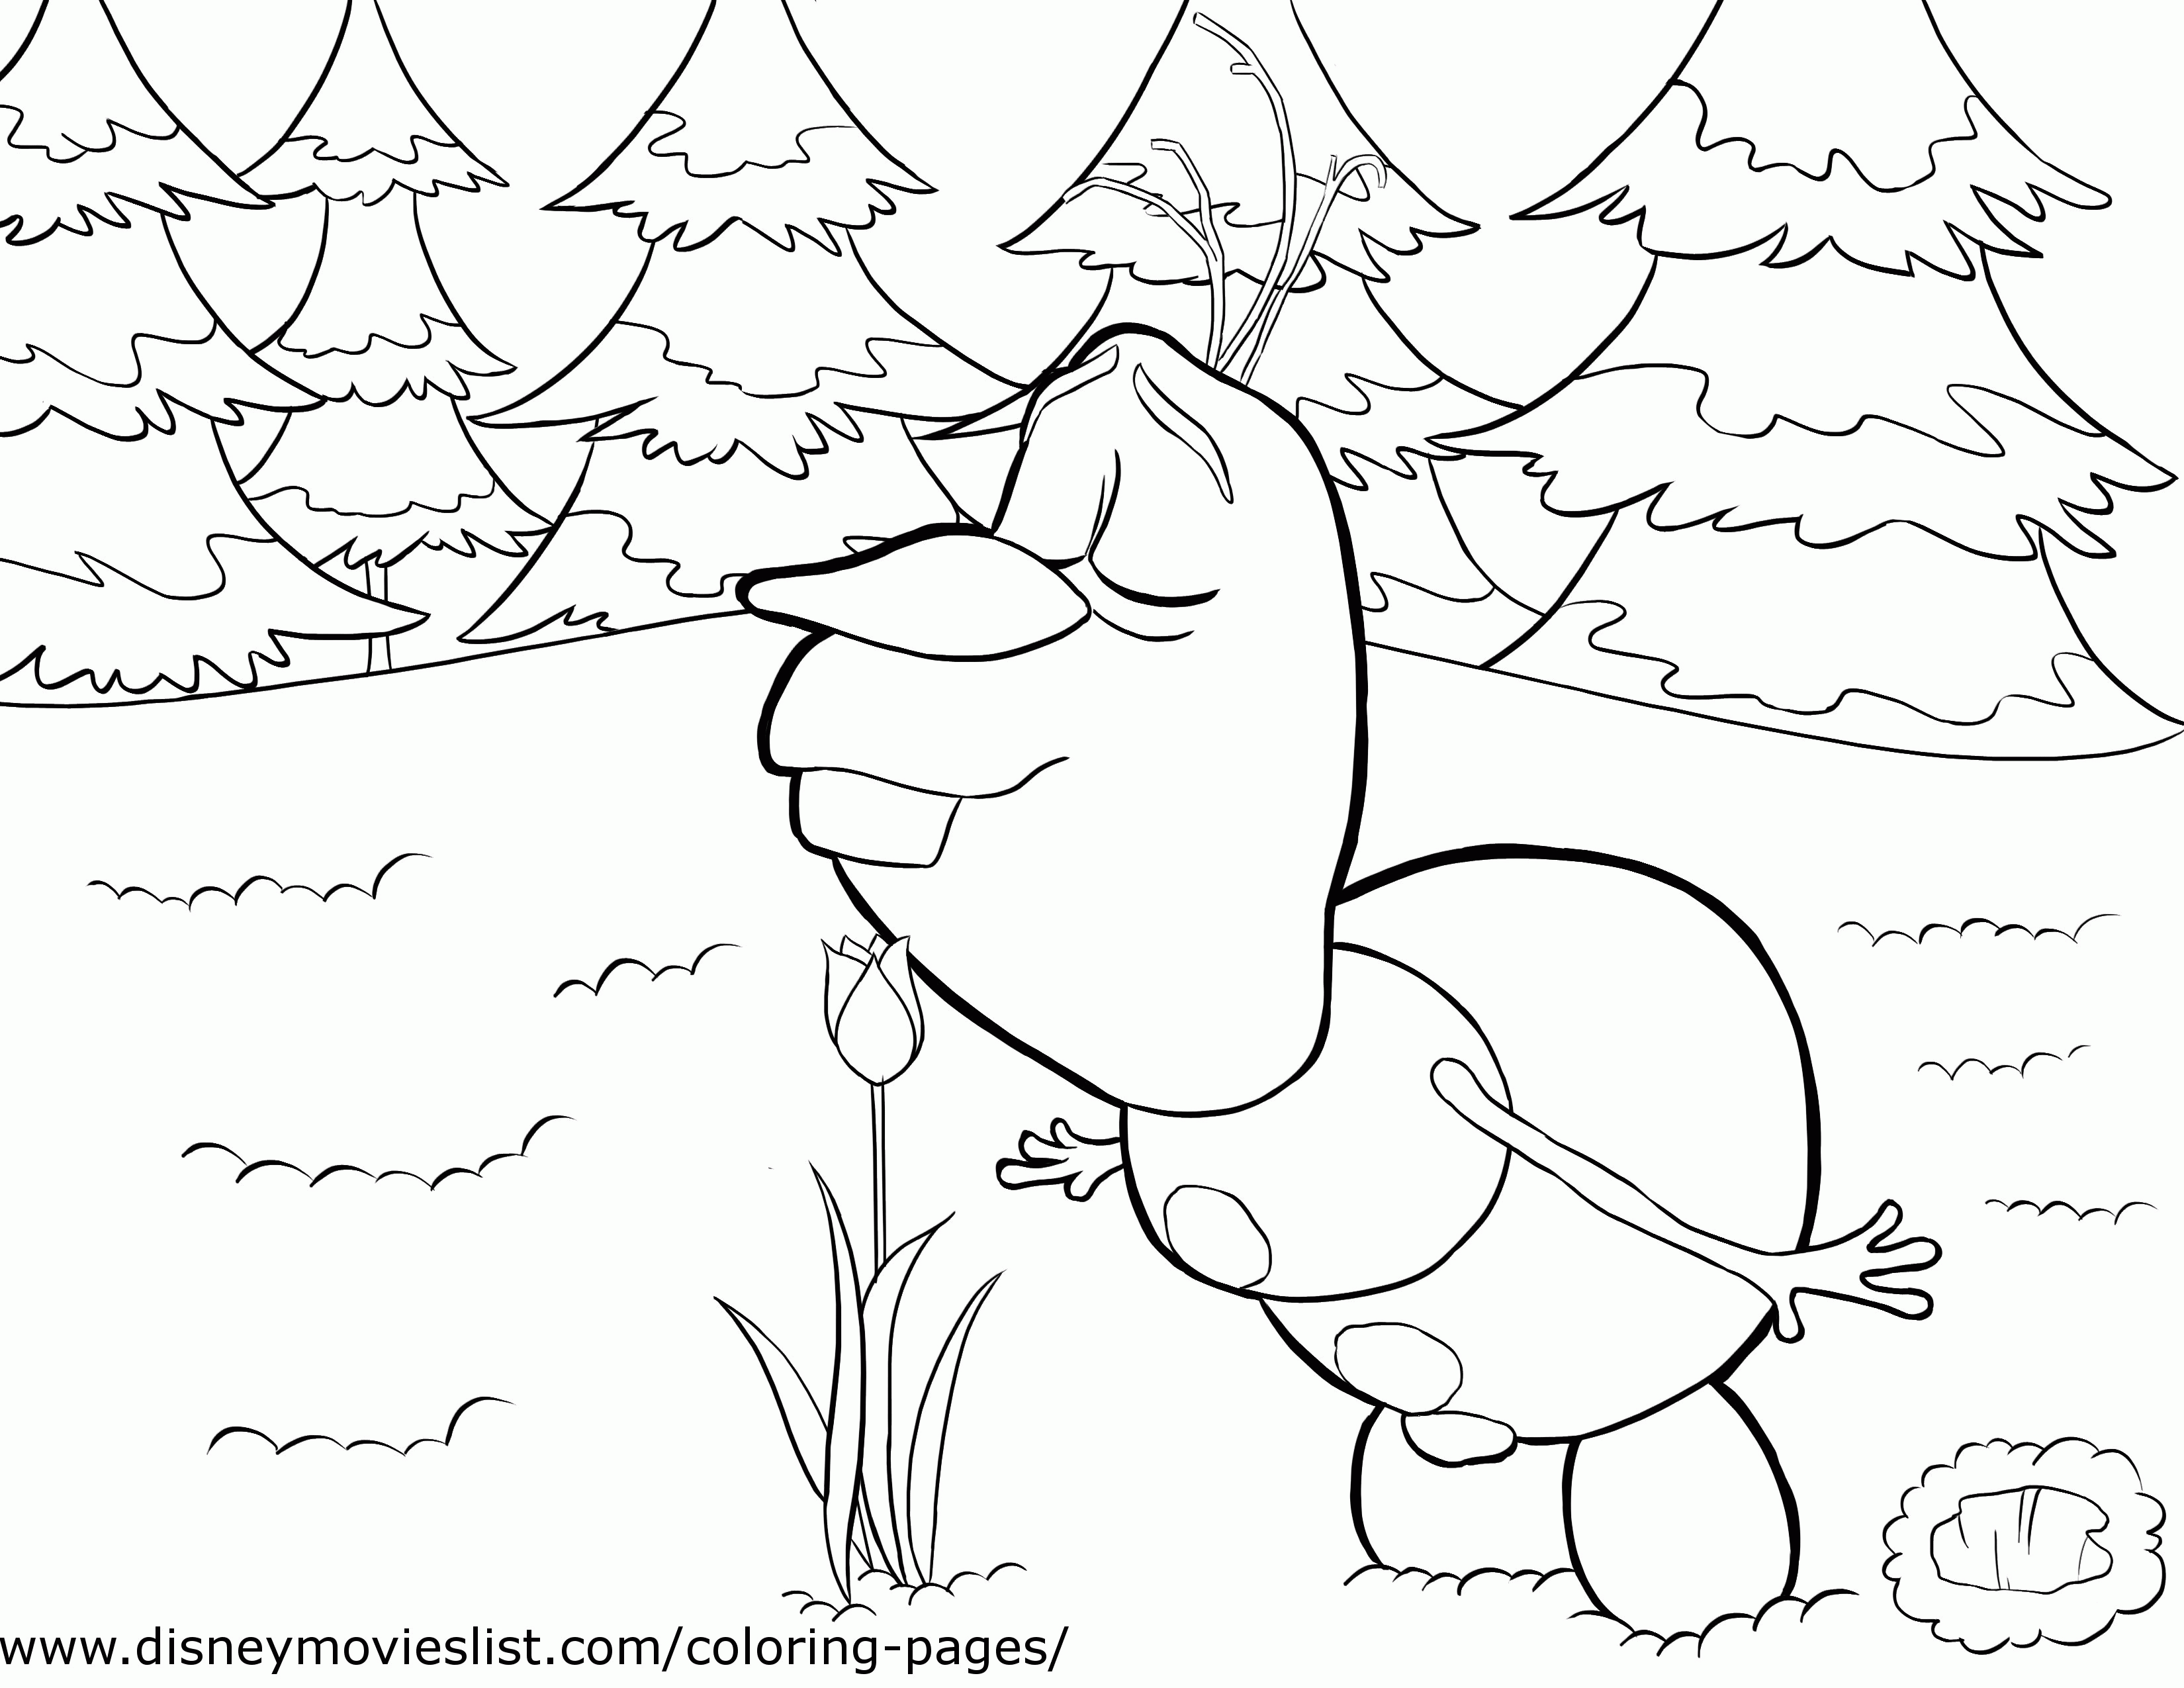 Frozen Coloring Pages | Only Coloring Pages - Coloring Home